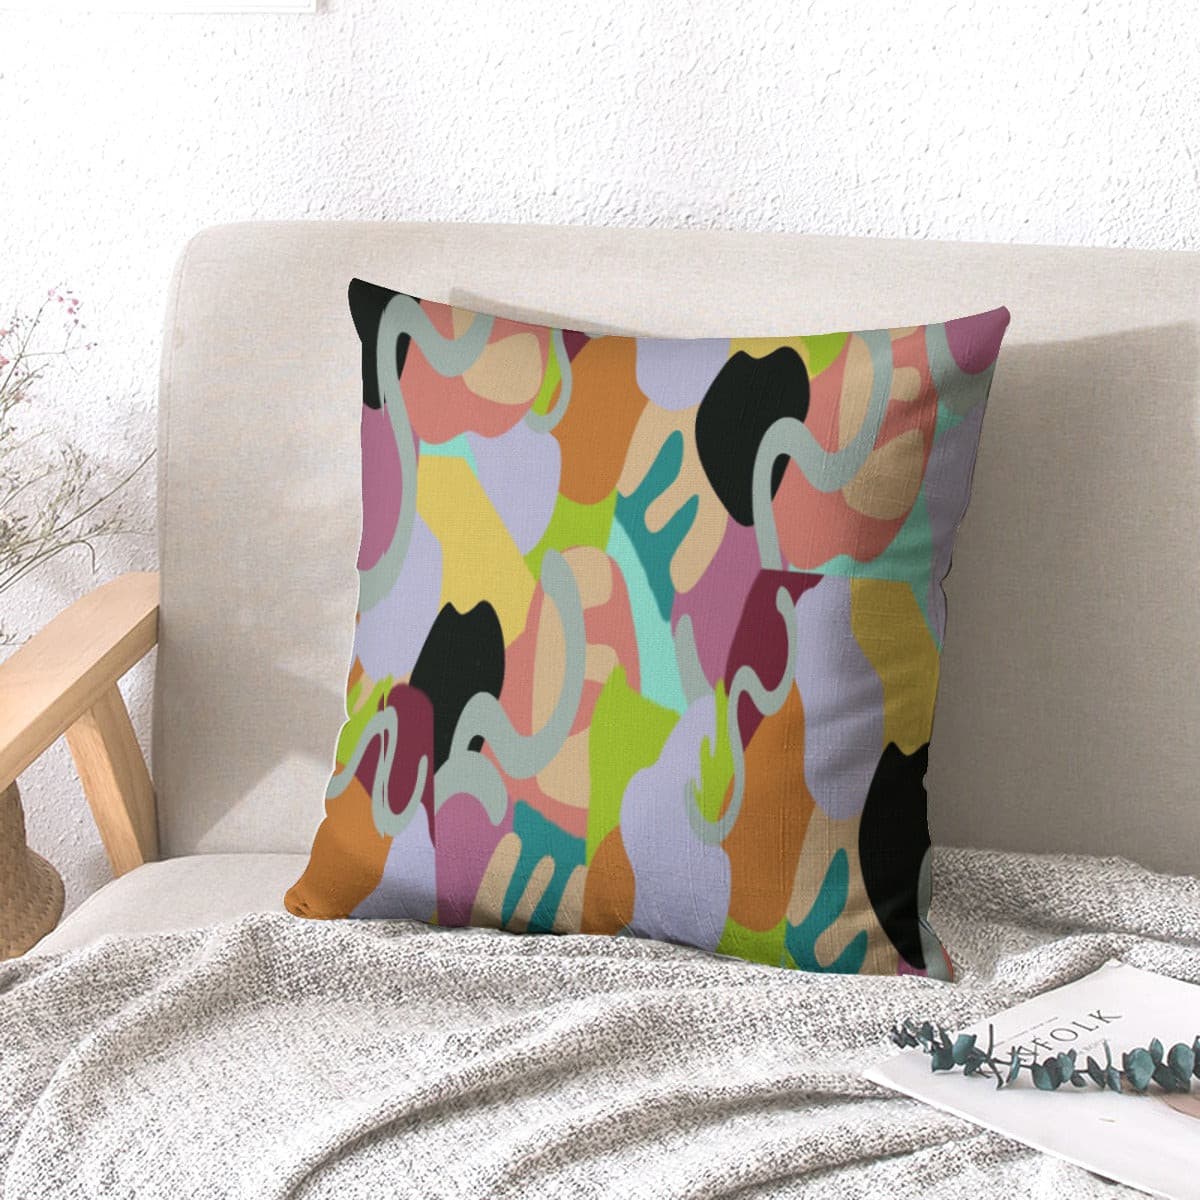 MULTI-COLORED Abstract Wild Couch pillow with pillow Inserts | linen type fabric Ma - couch pillow at TFC&H Co.